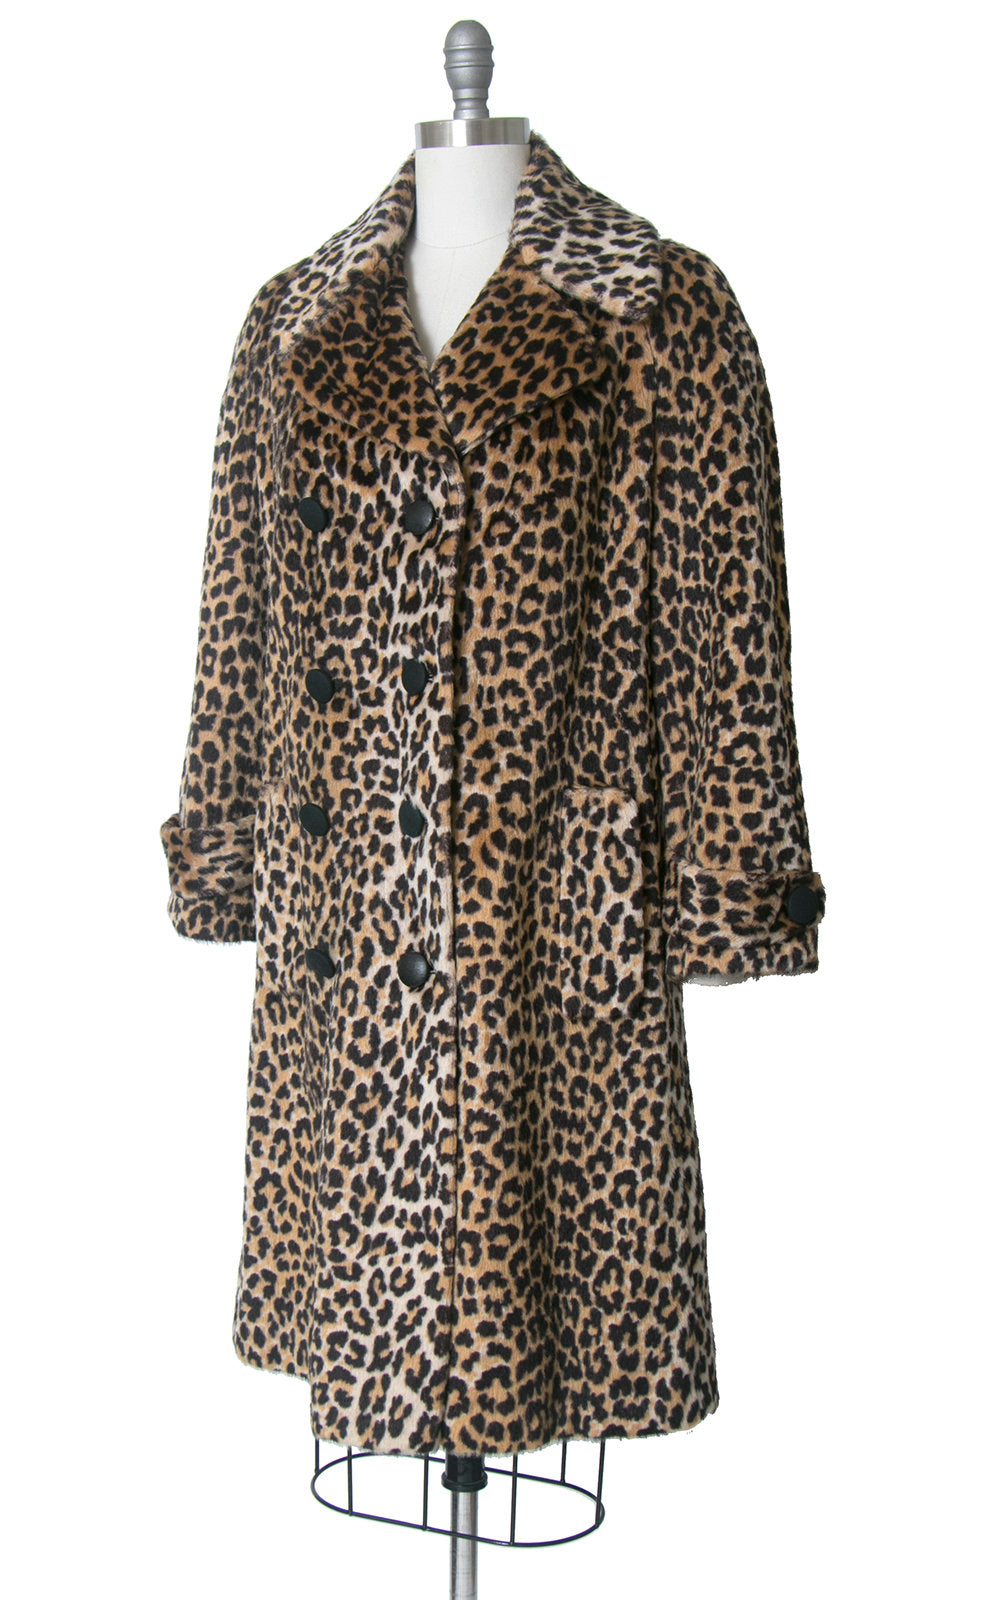 1960s Leopard Print Faux Fur Double Breasted Coat | medium/large ...